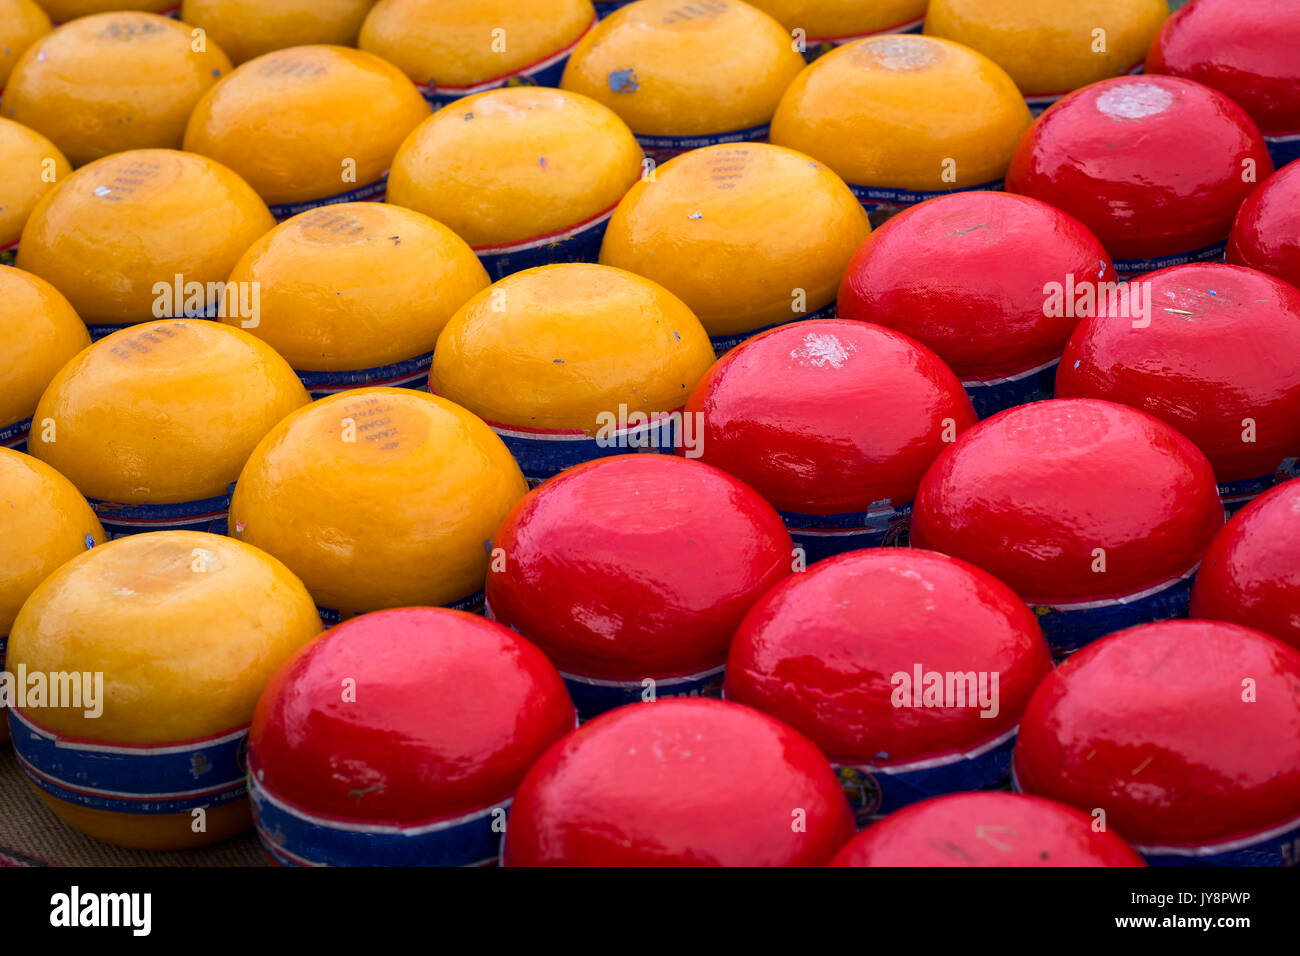 Red=waxed export cheese and yellow-waxed local cheese in Edam, Netherlands Stock Photo